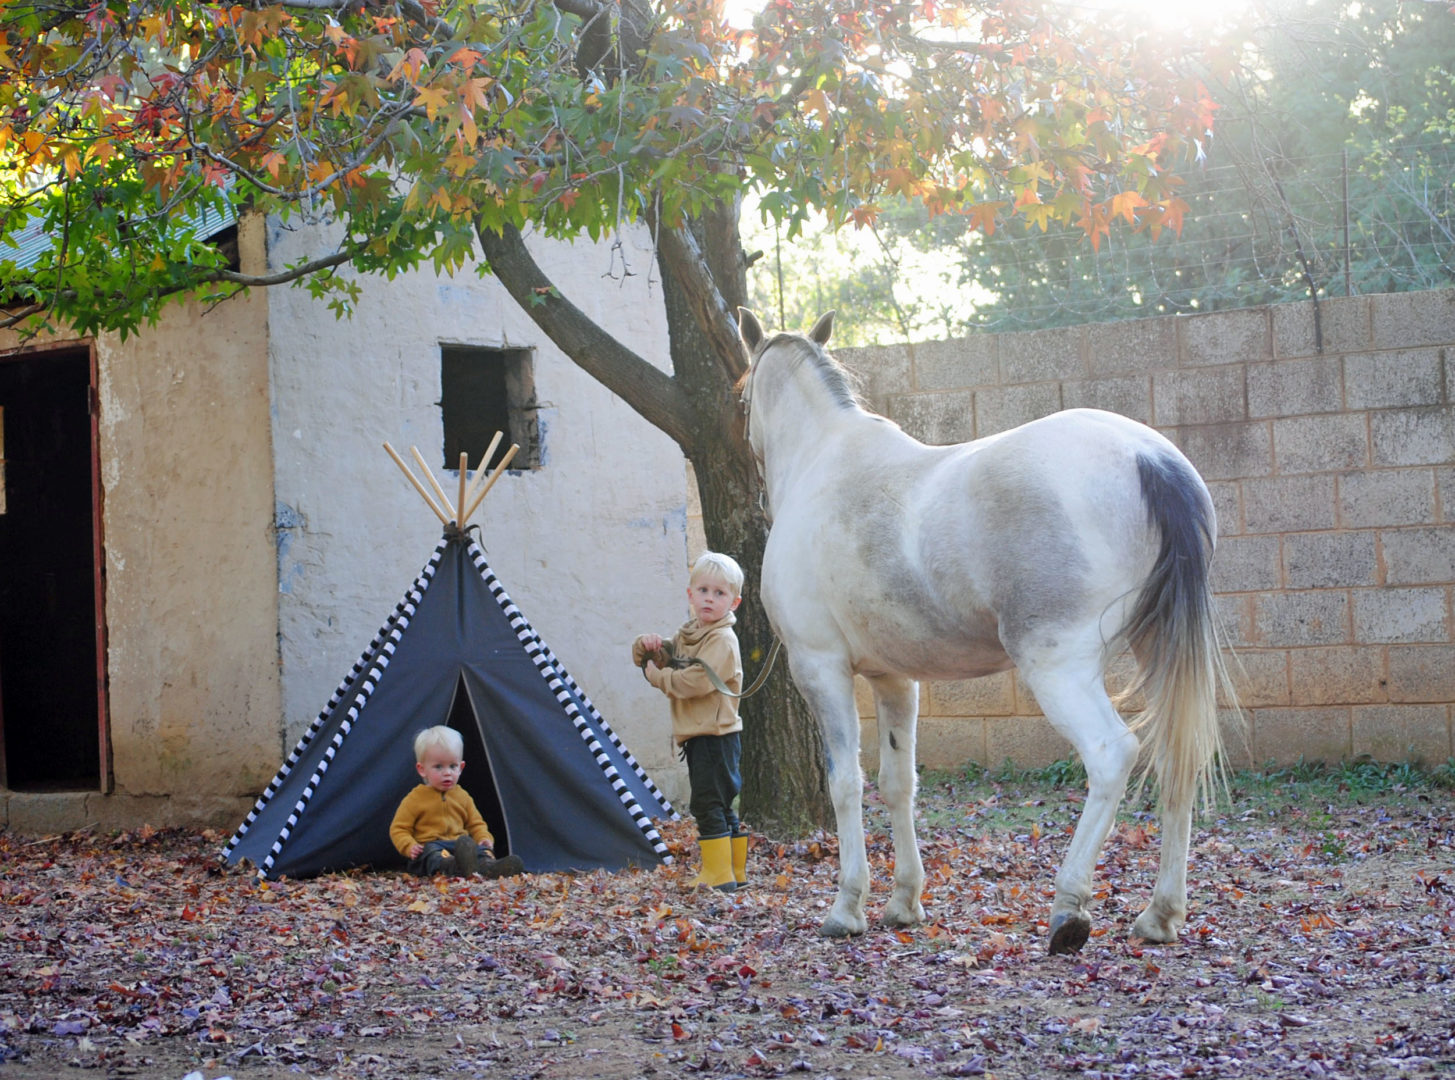 Dark grey teepee play tent under autumn tree with white horse